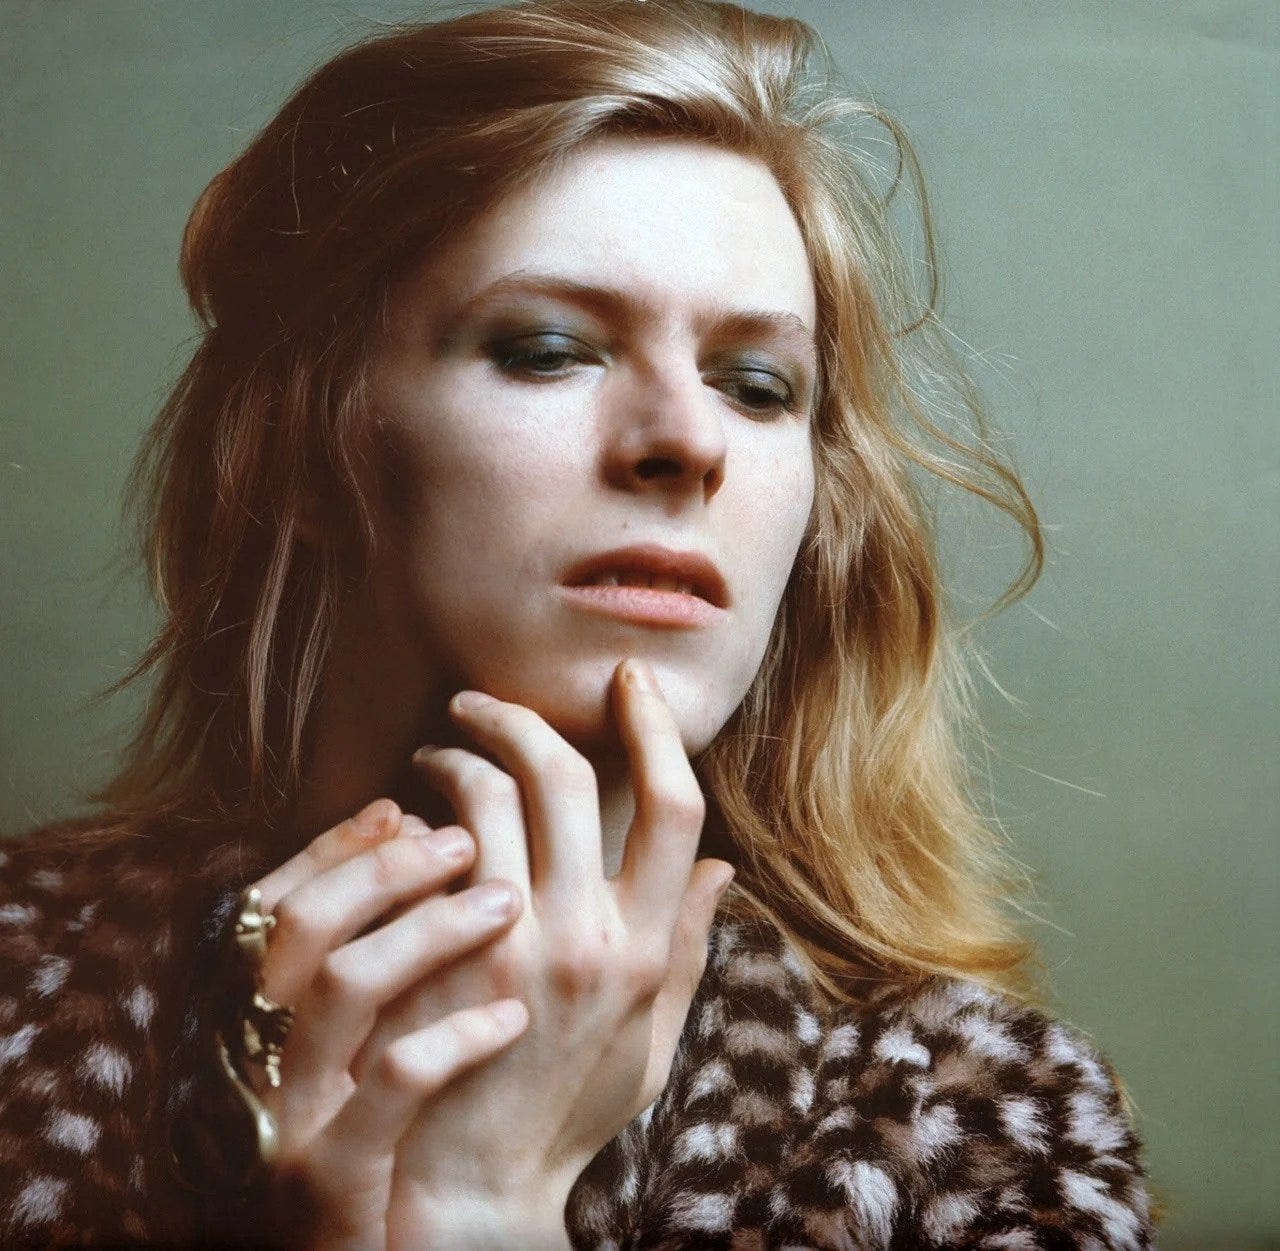 David Bowie with shoulder-length blond hair, wearing eyeshadow, rings, and a dyed brown and white fur coat